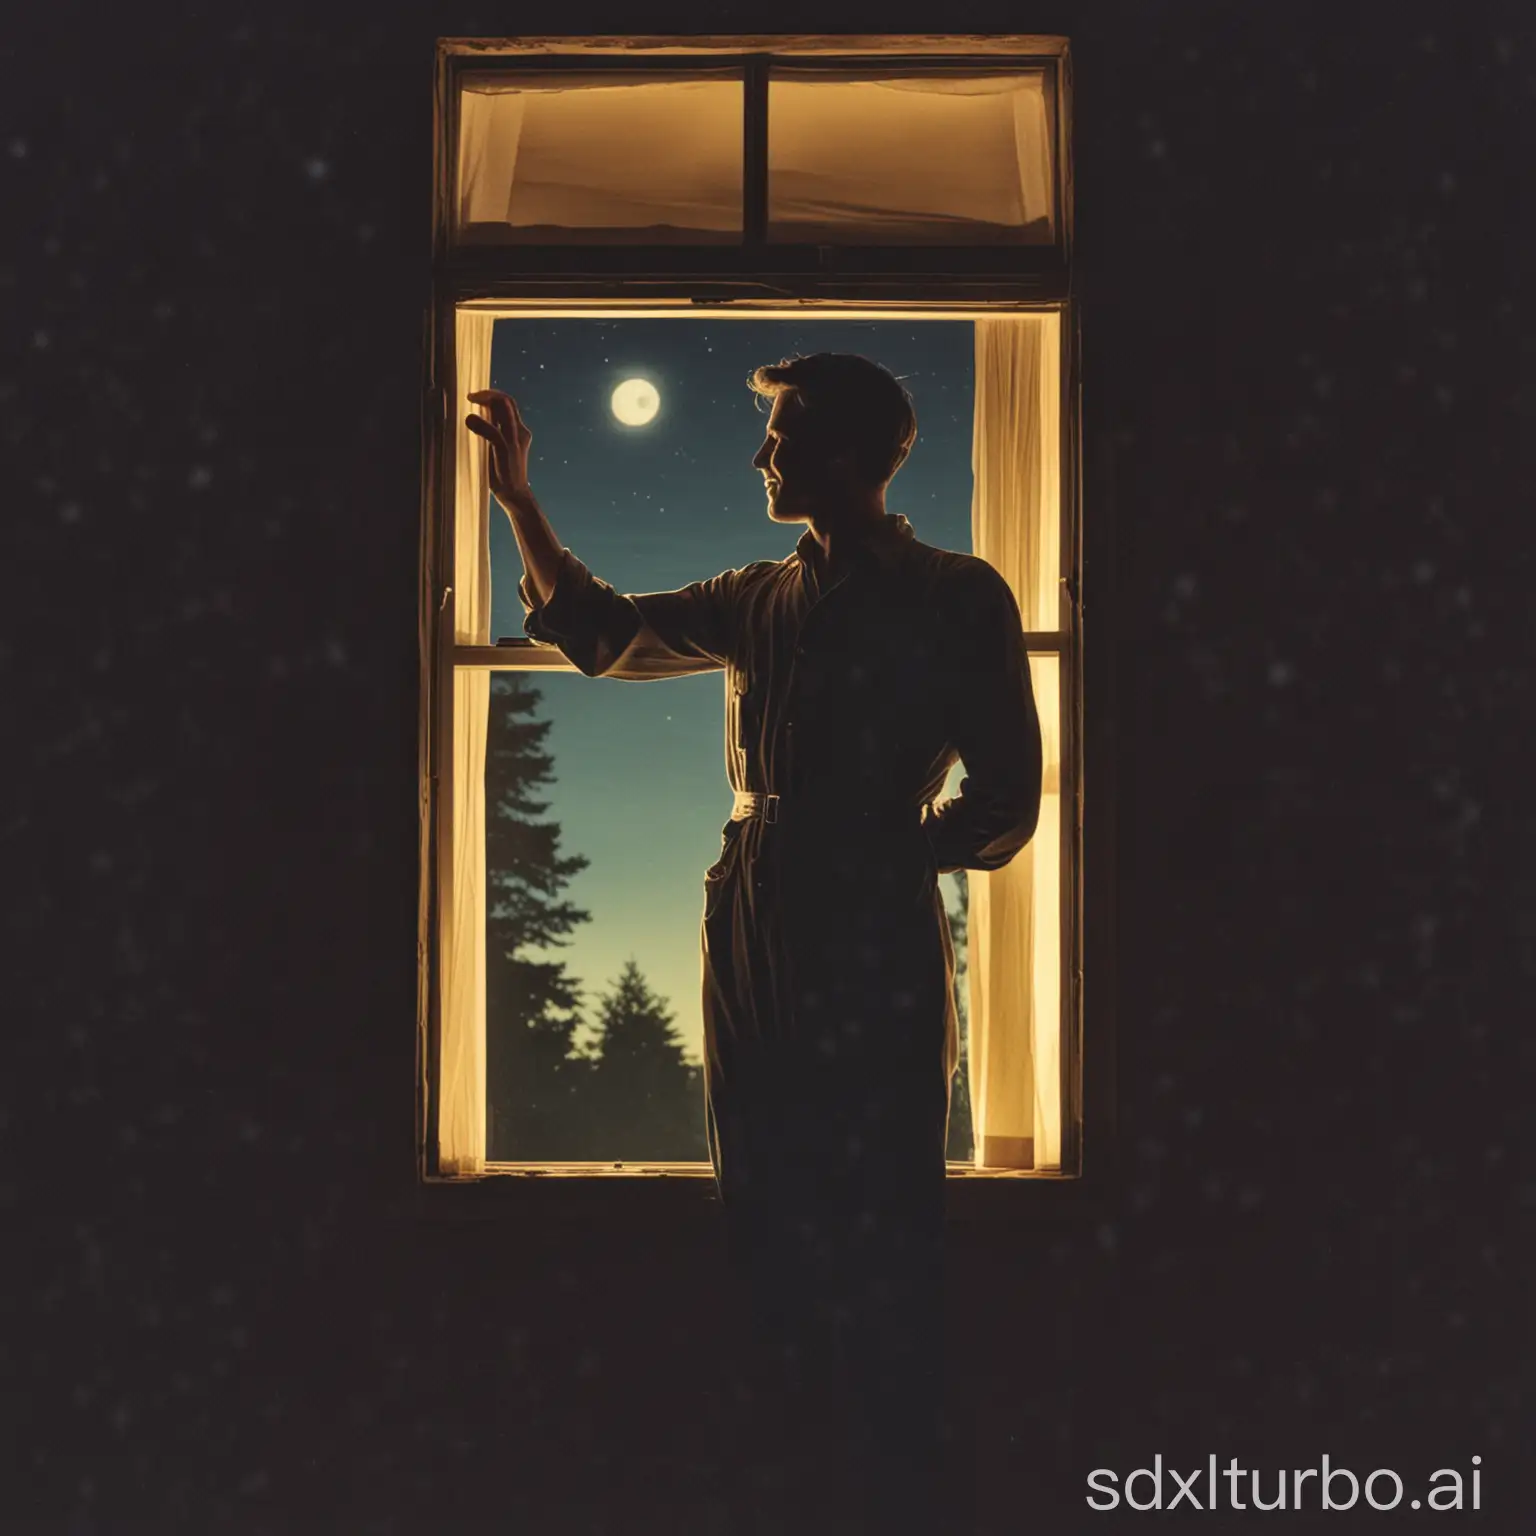 vintage 1960s photograph of a rural A silhouette of a photographer man stands at the window, looking out into the night. The moonlight gently illuminates his clothing, casting a soft shadow over his face, smiling, color